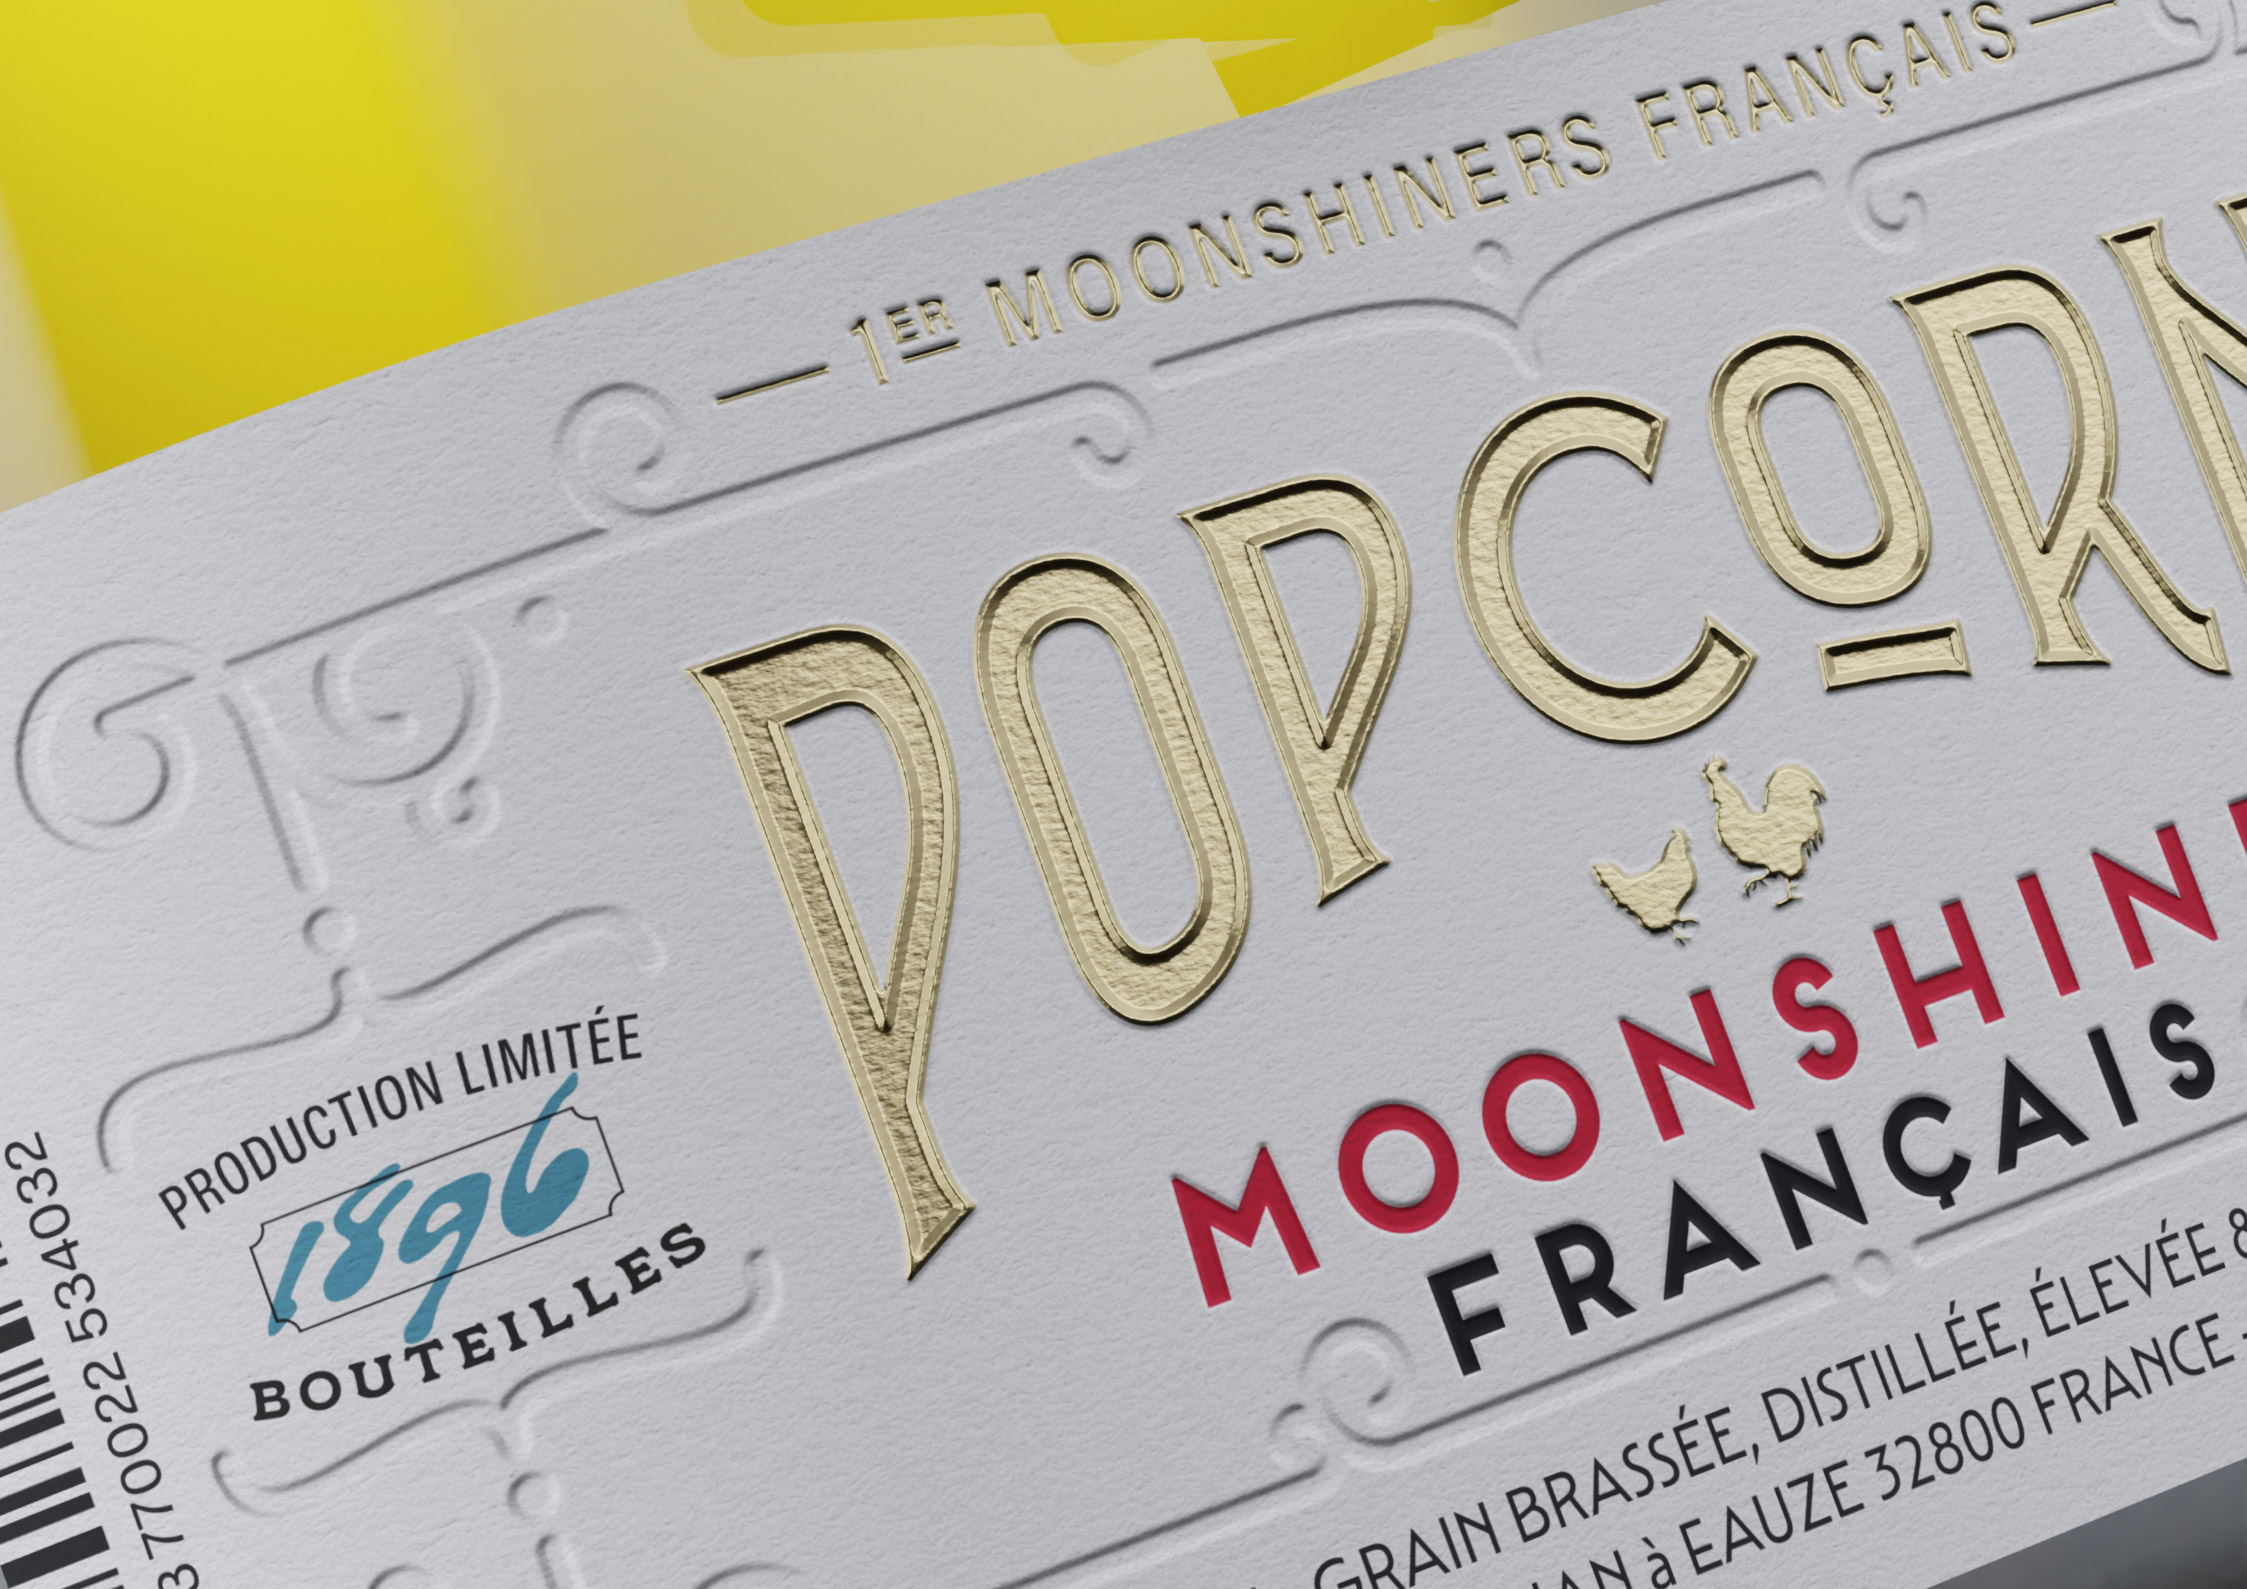 Not Your Usual Popcorn: A French Moonshine with Unique Packaging Design